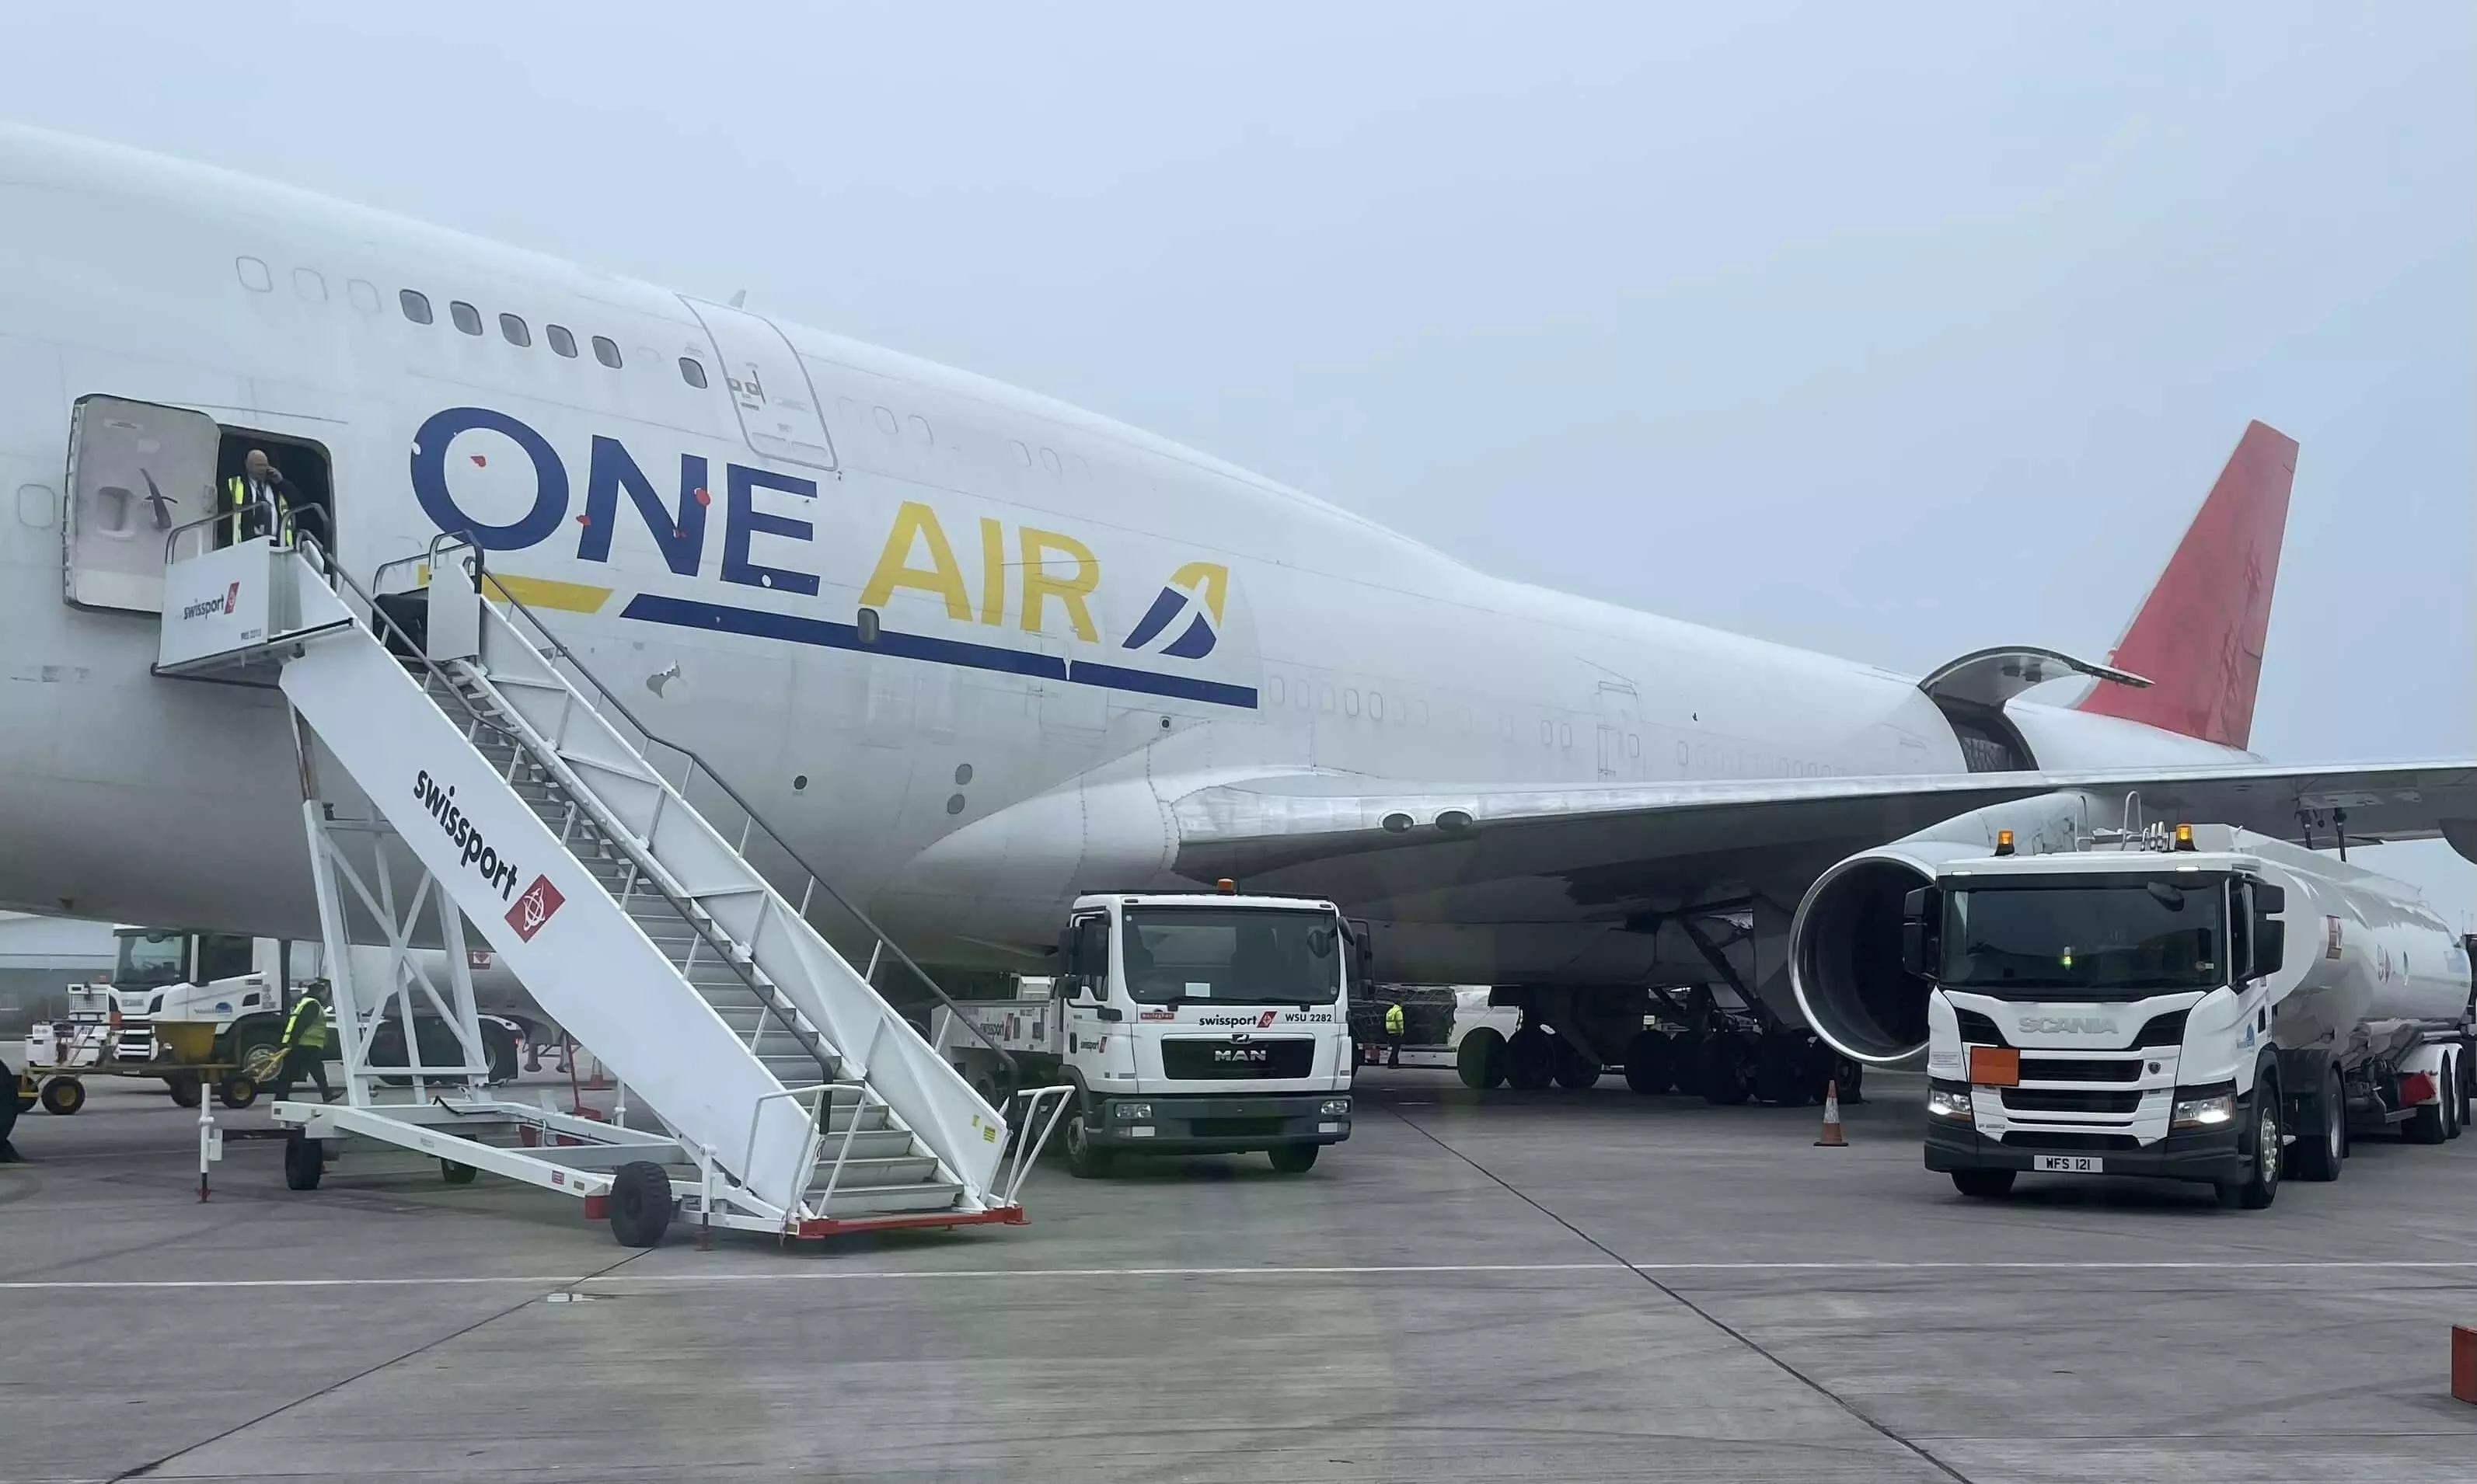 One Air commences Boeing 747 freighter operations at East Midlands Airport